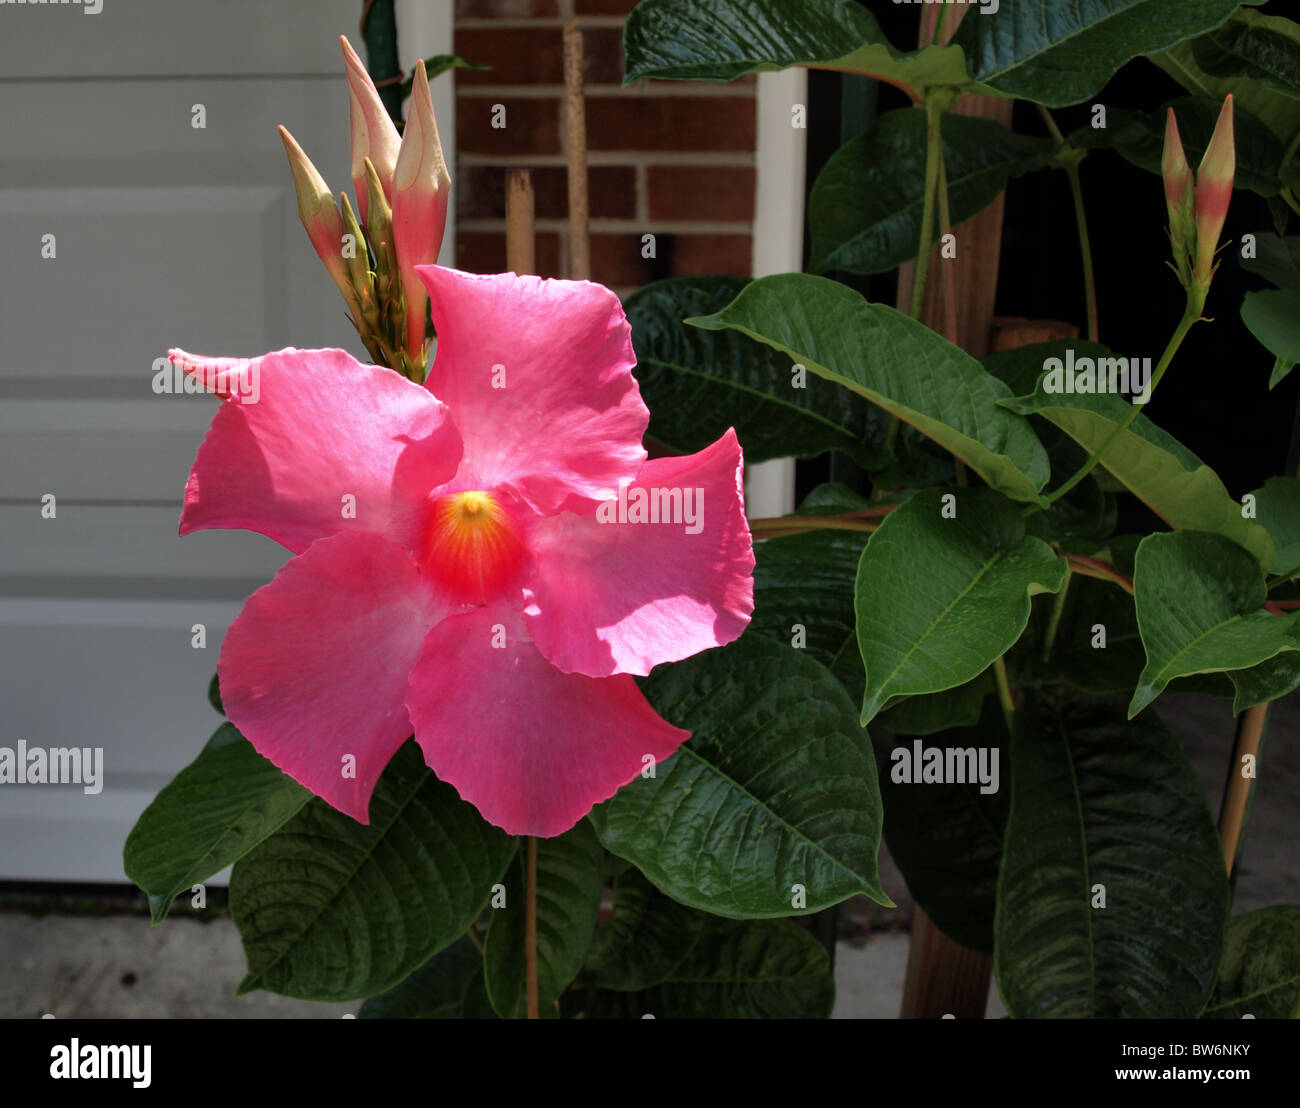 outdoor house plant creeper vine pink flower Mandevilla  'Alice Dupont' climbing green leaves buds Stock Photo